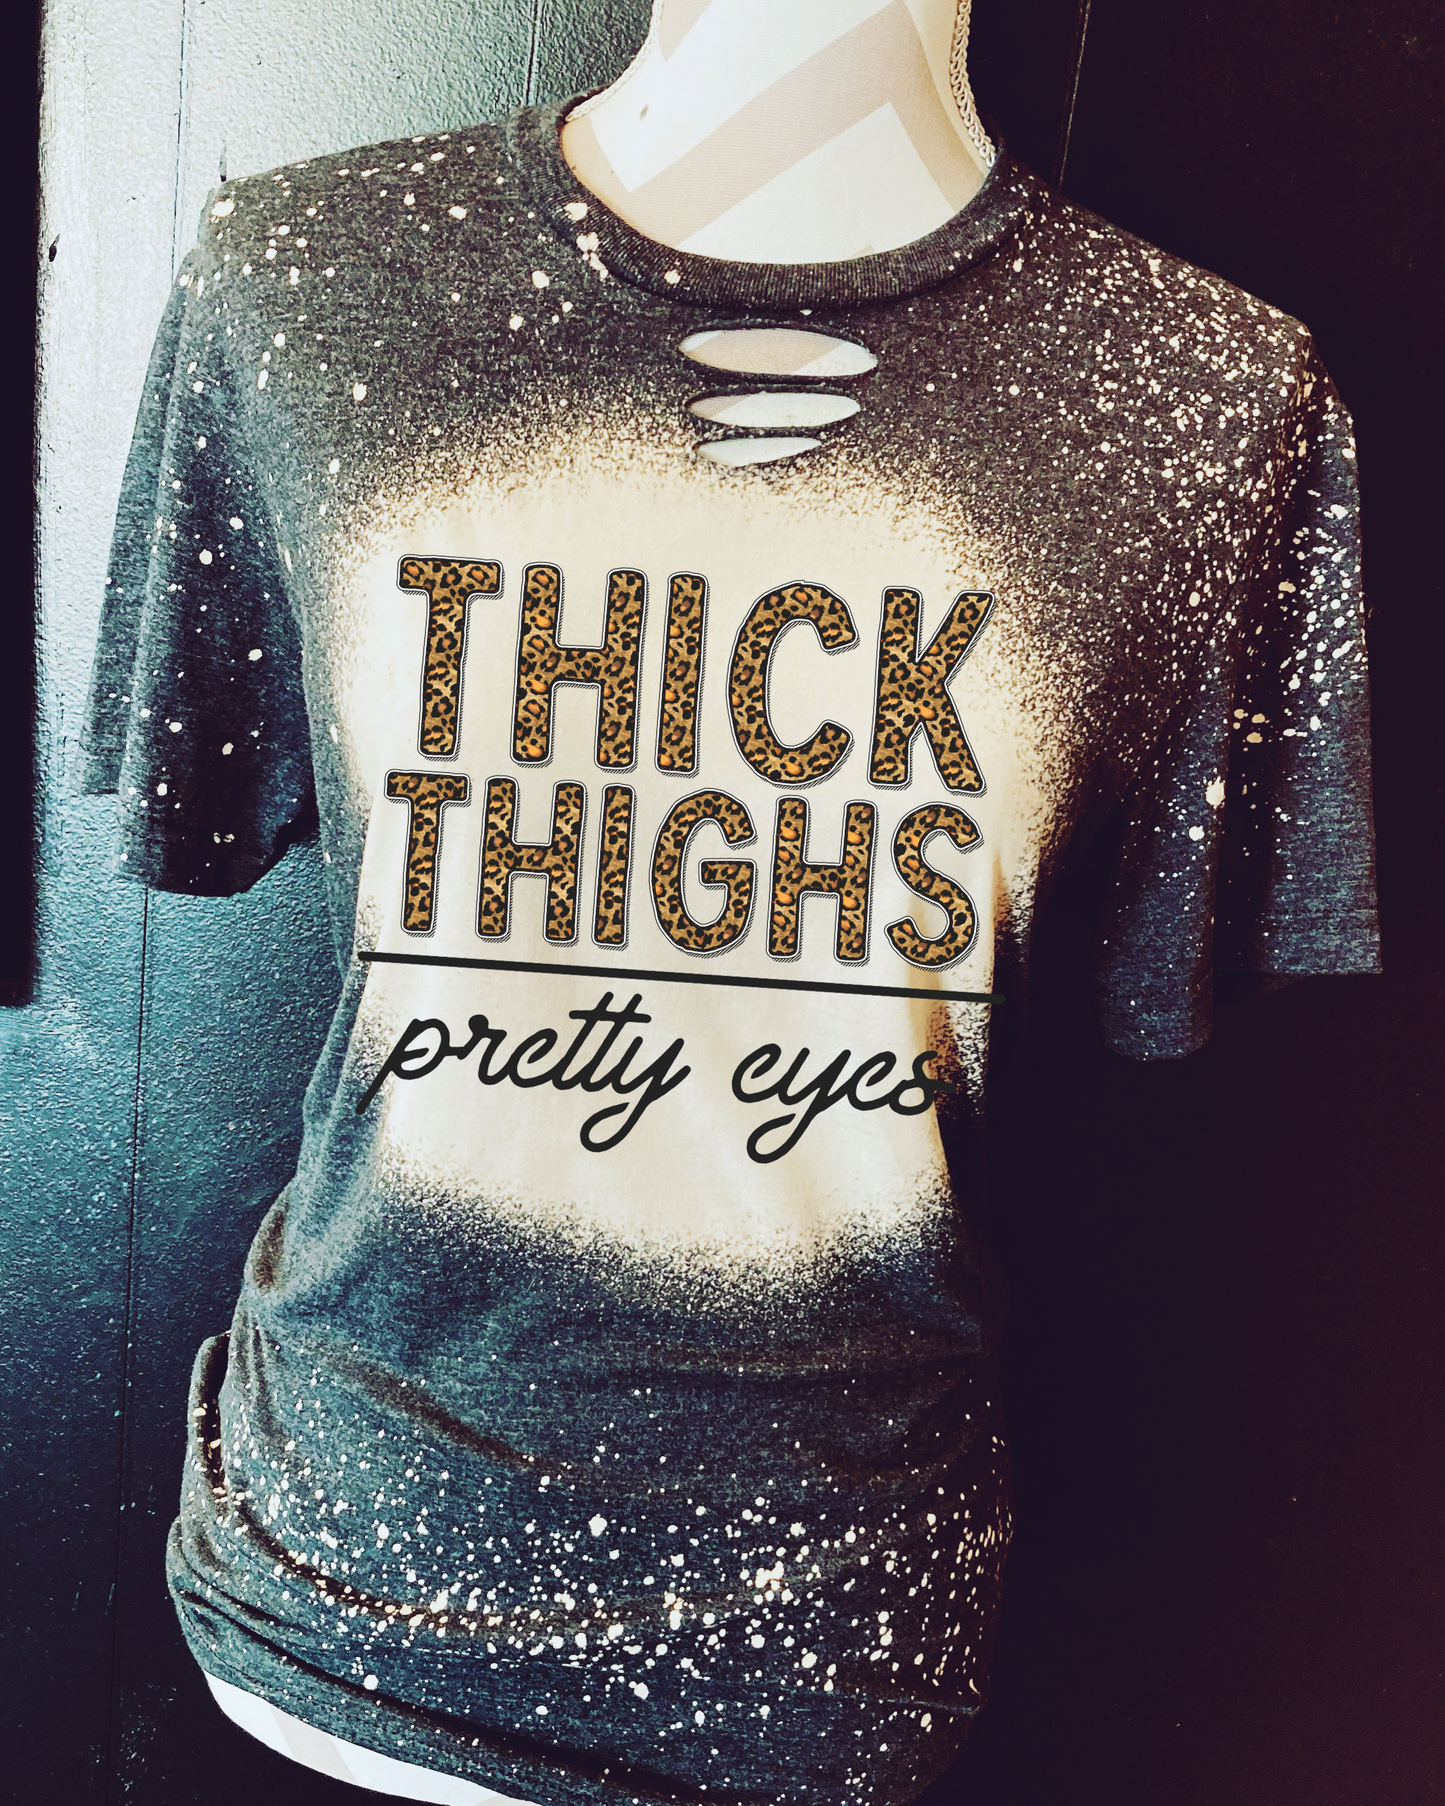 Thick Thighs Pretty eyes